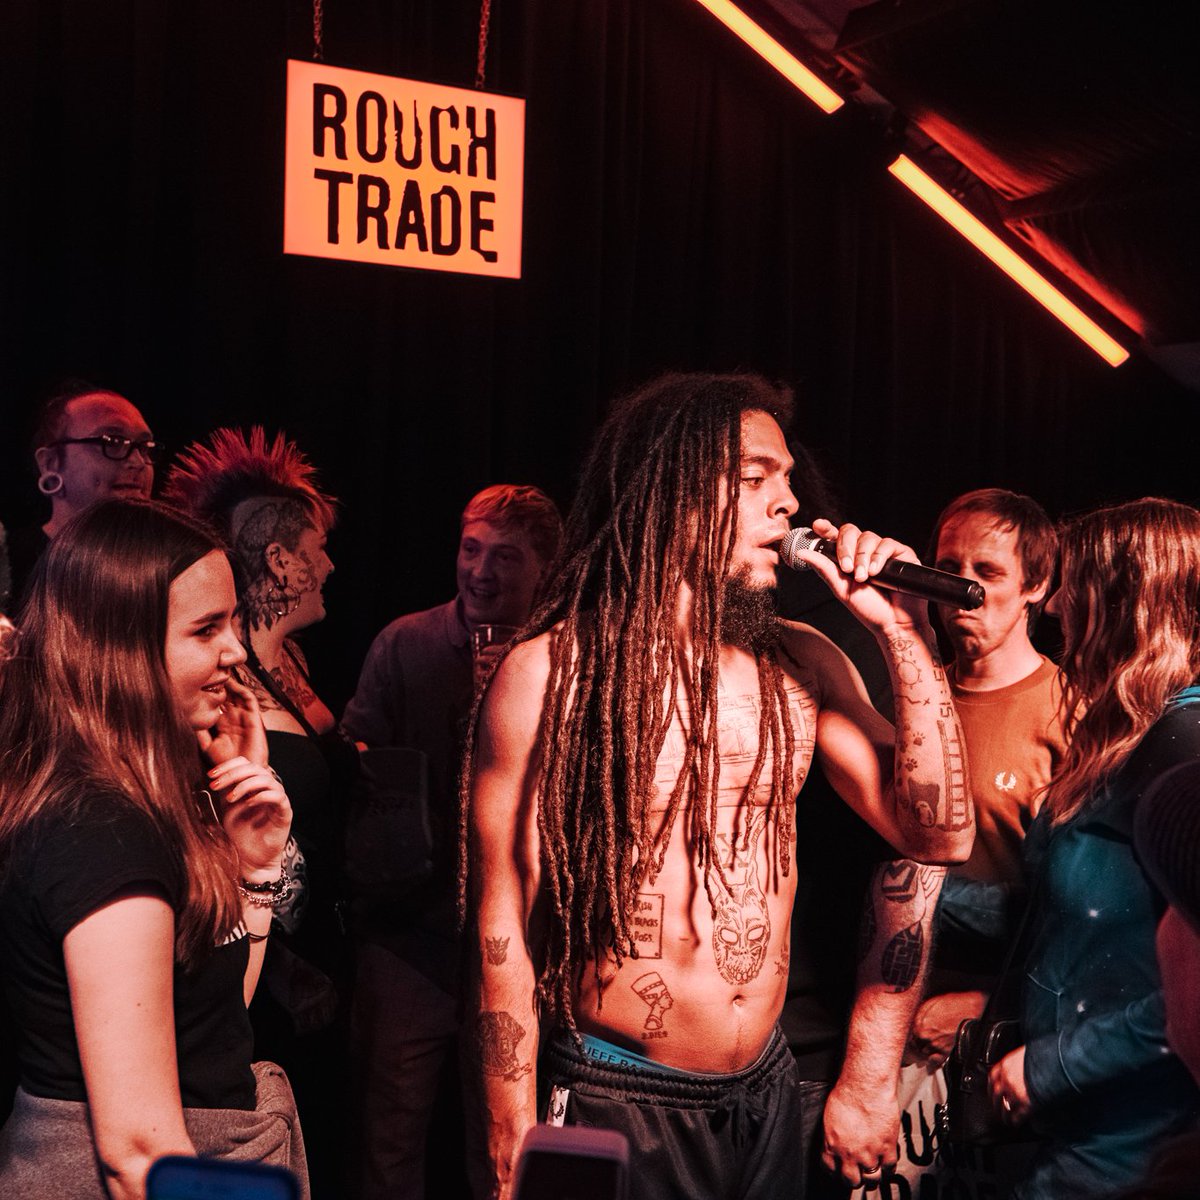 A memorable night with @BobbyVylan at Rough Trade Nottingham. Looking forward to our remaining shows with the electric punk rock band in Bristol and London this week. Photo by @jadekvowles